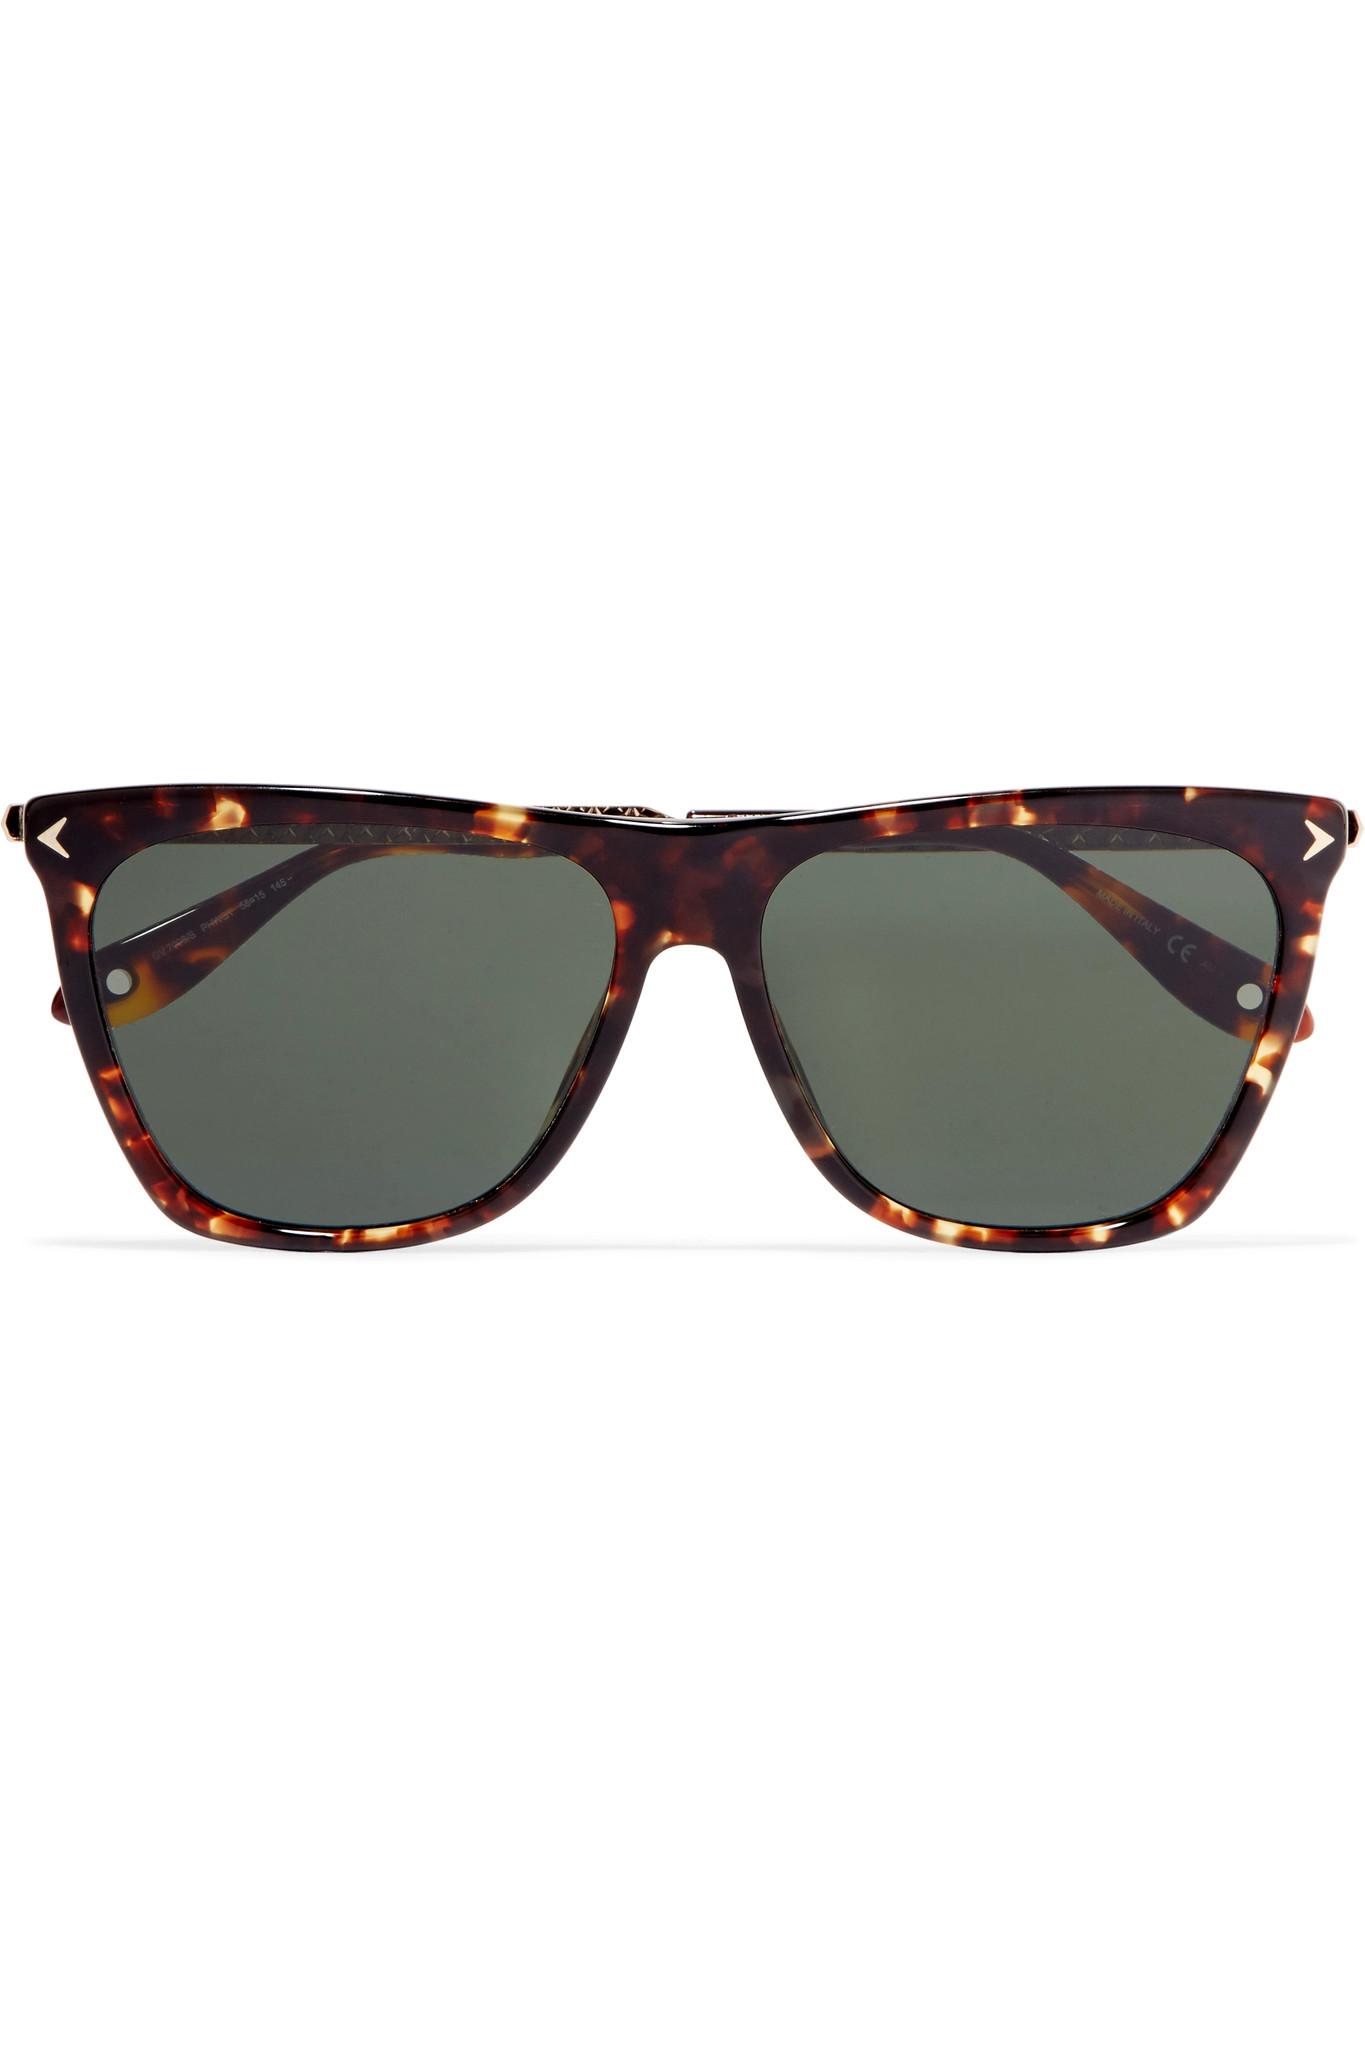 Givenchy D-frame Tortoiseshell Acetate And Gold-tone Sunglasses in Gray